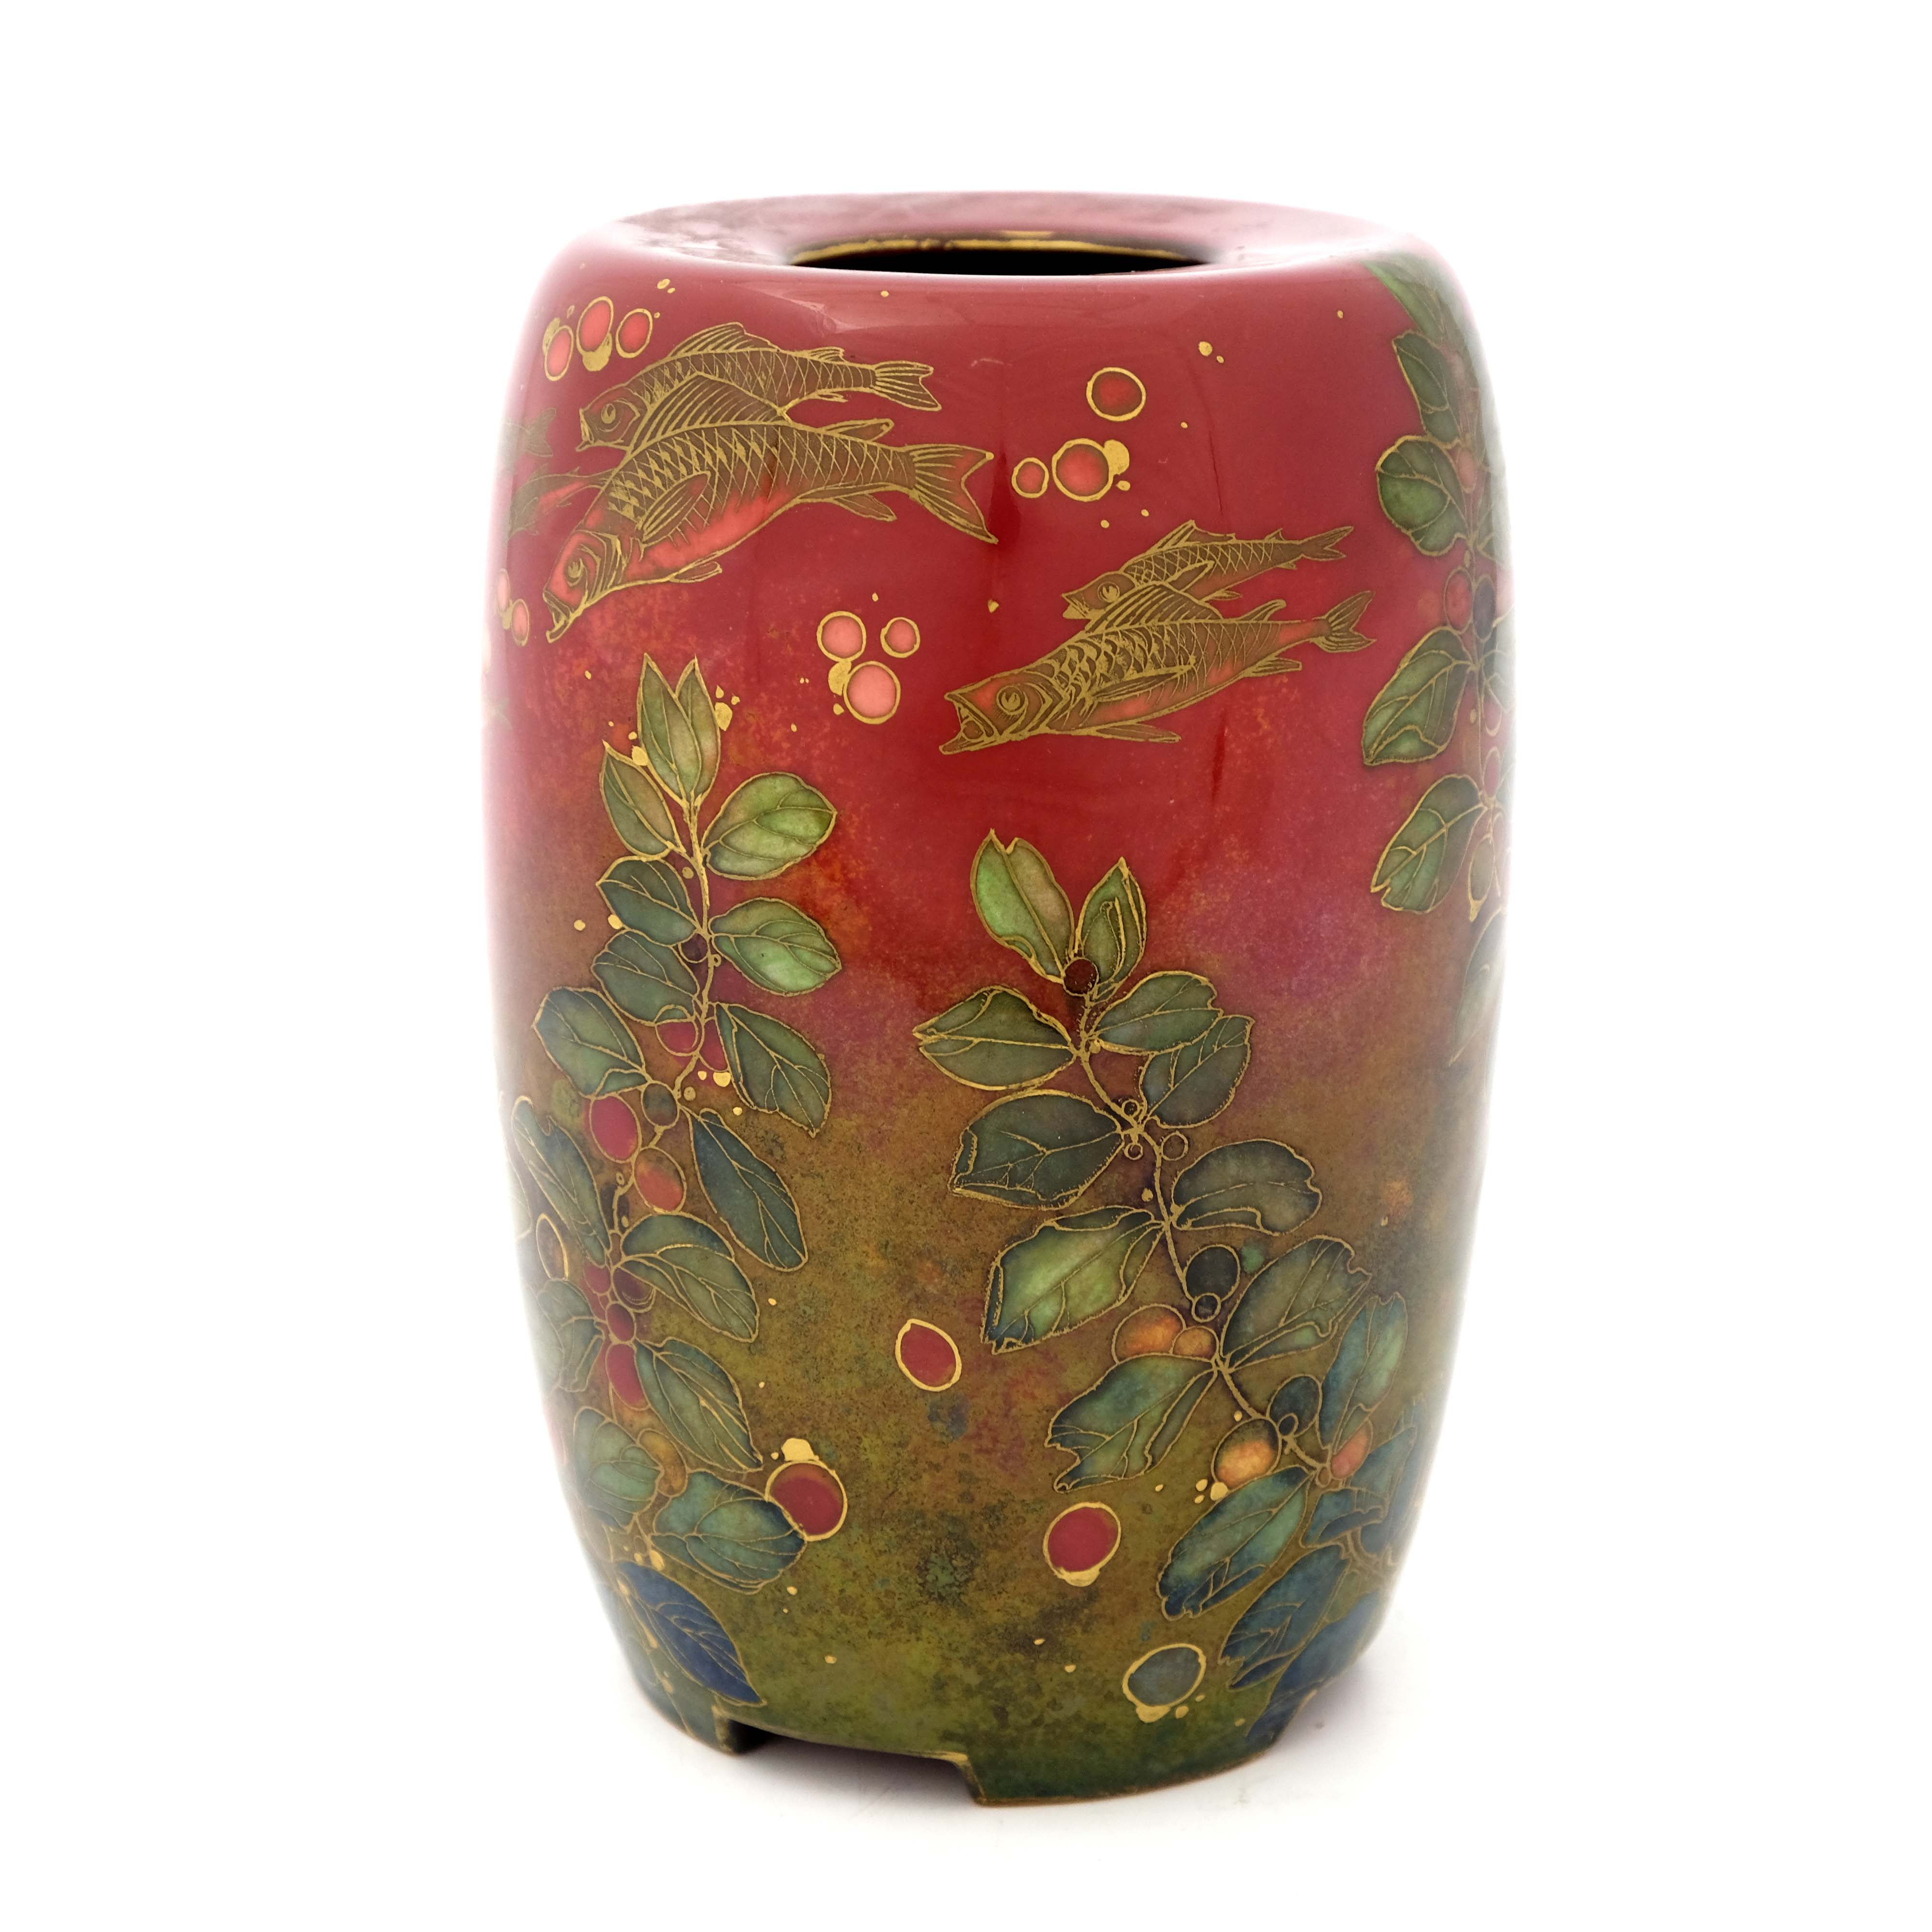 Harry Nixon for Royal Doulton, a Flambe vase - Image 3 of 5